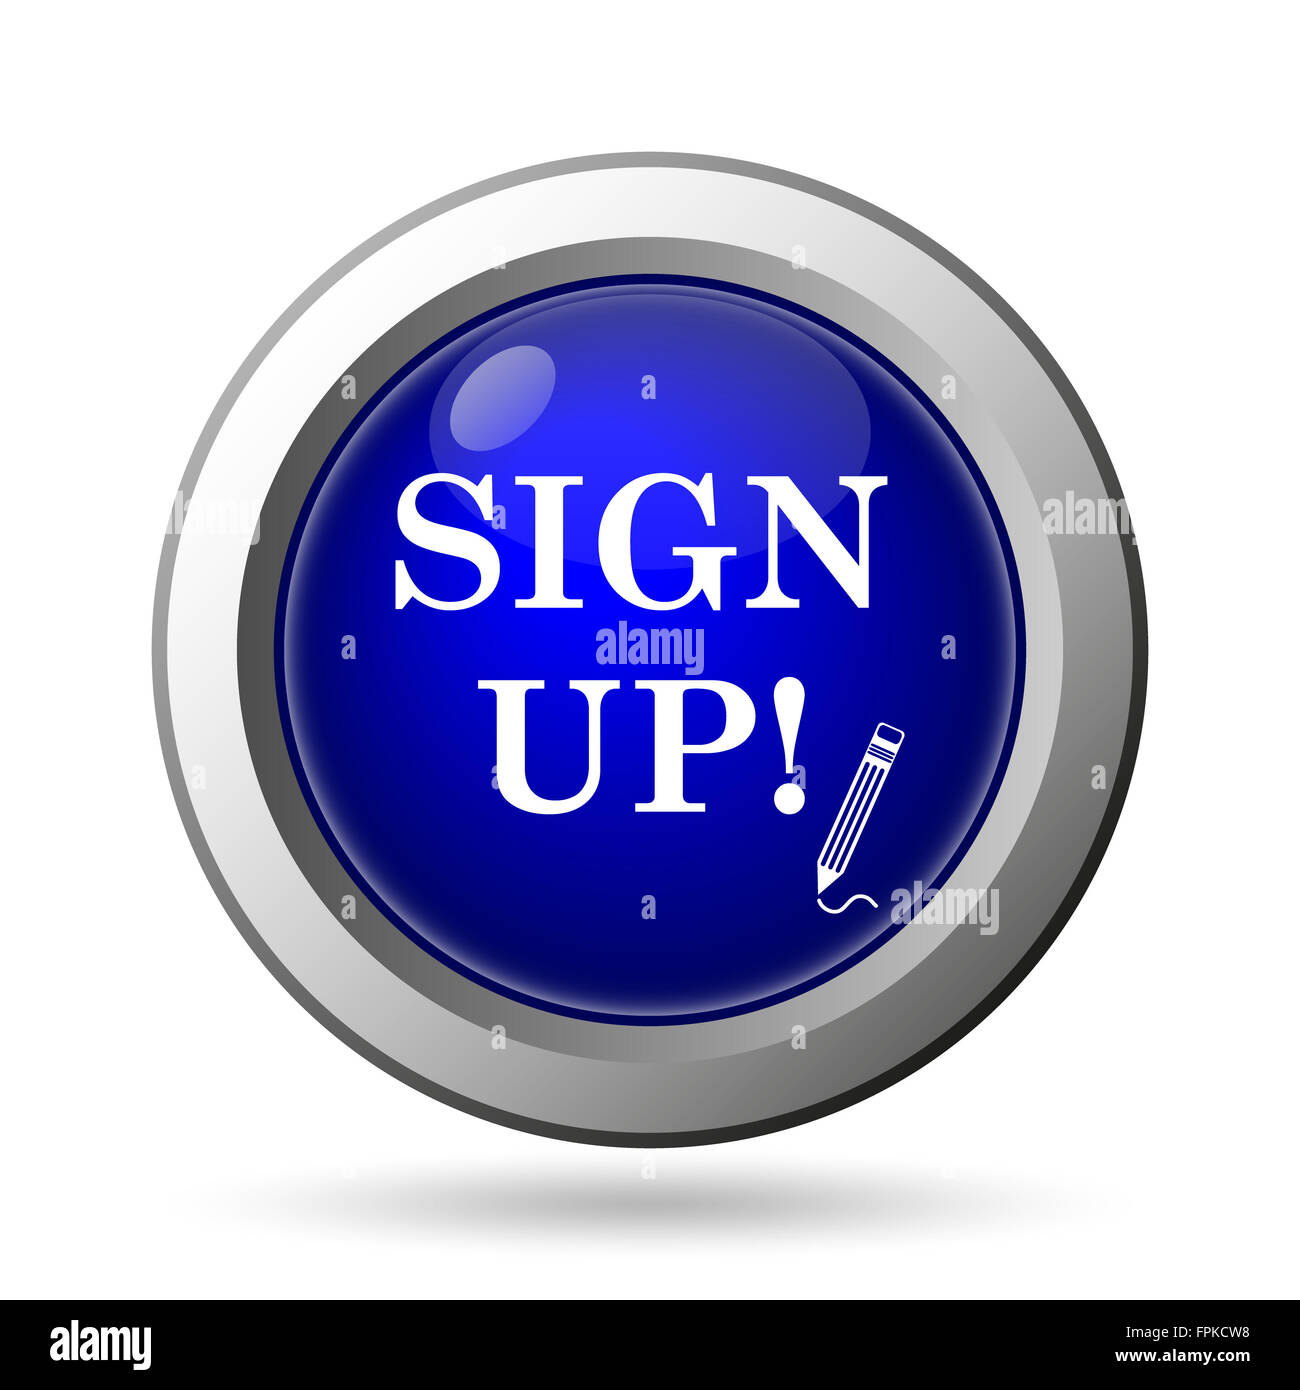 Sign up icon Stock Photo